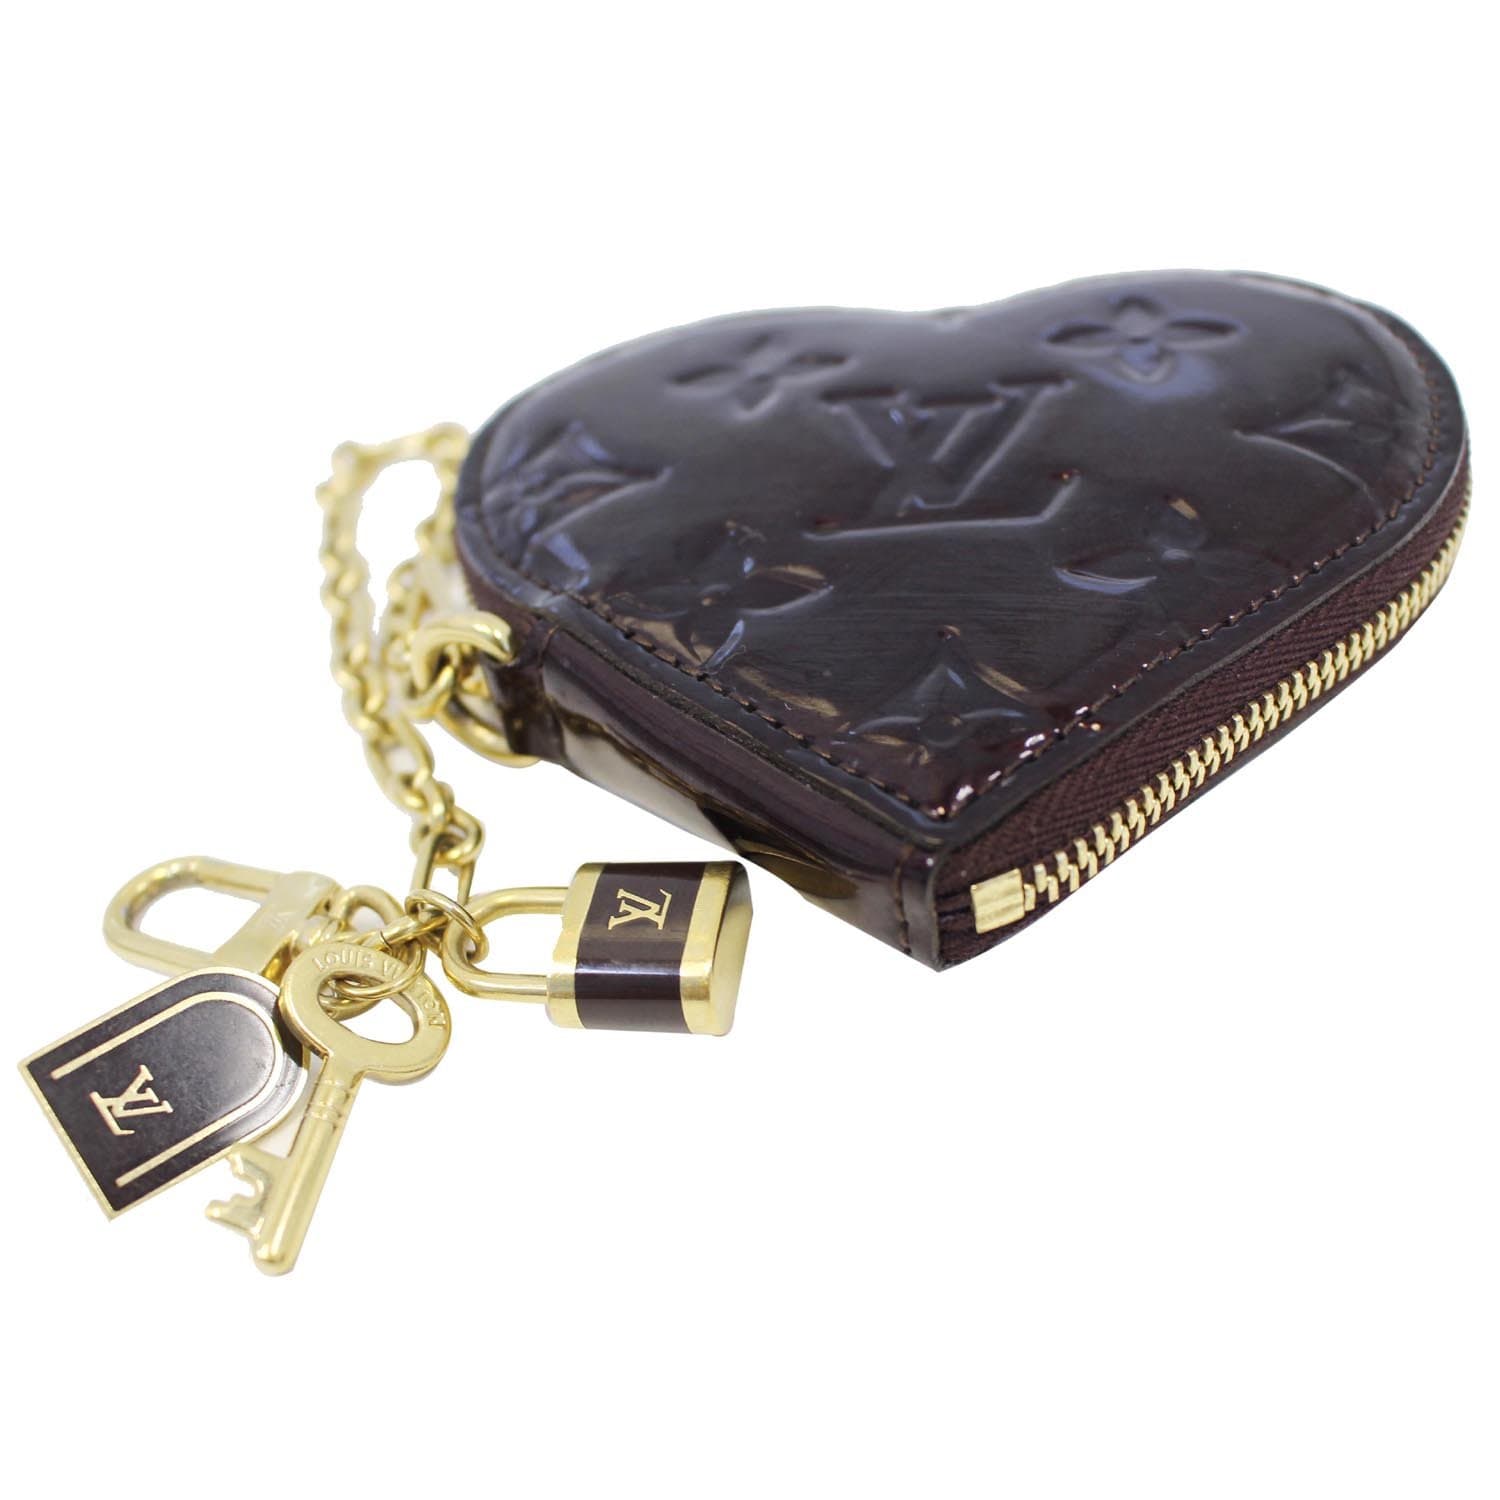 Louis Vuitton Heart Coin Purse Limited Edition Degrade Monogram Vernis -  ShopStyle Wallets & Card Holders